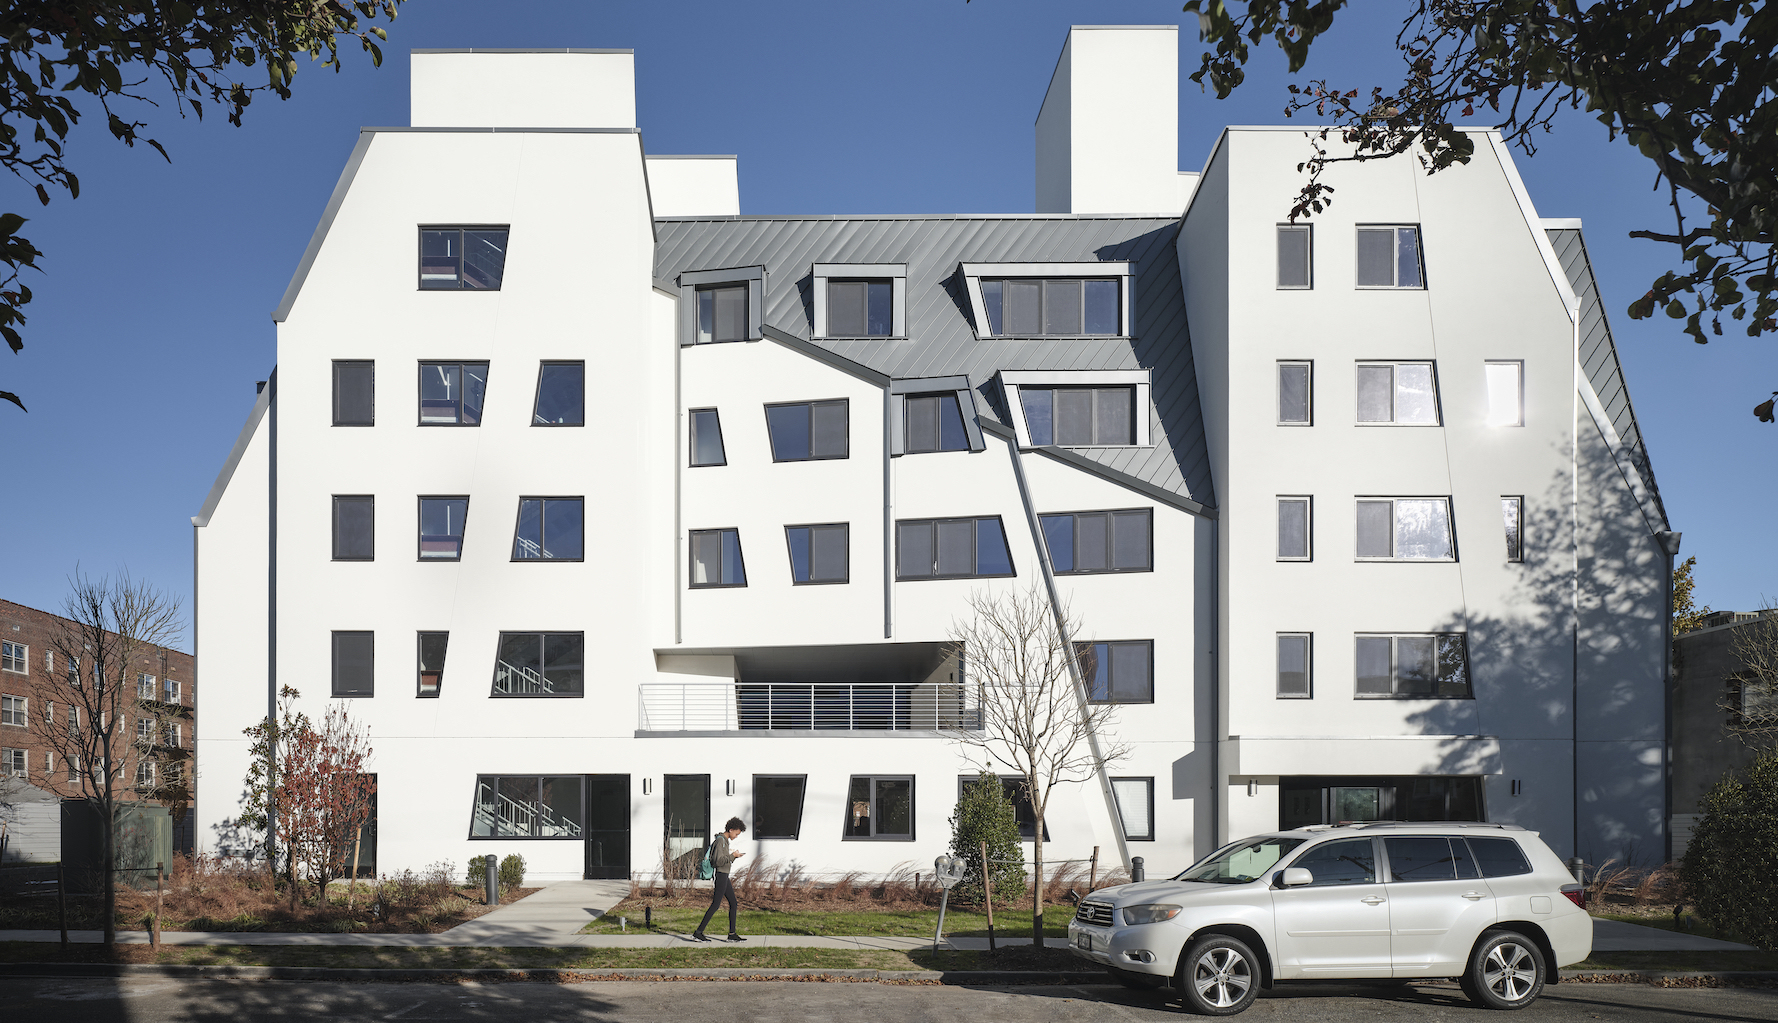 On Long Island, Studio Libeskind Delivers Supportive Housing With a Distinctive Facade and Thoughtful Programming